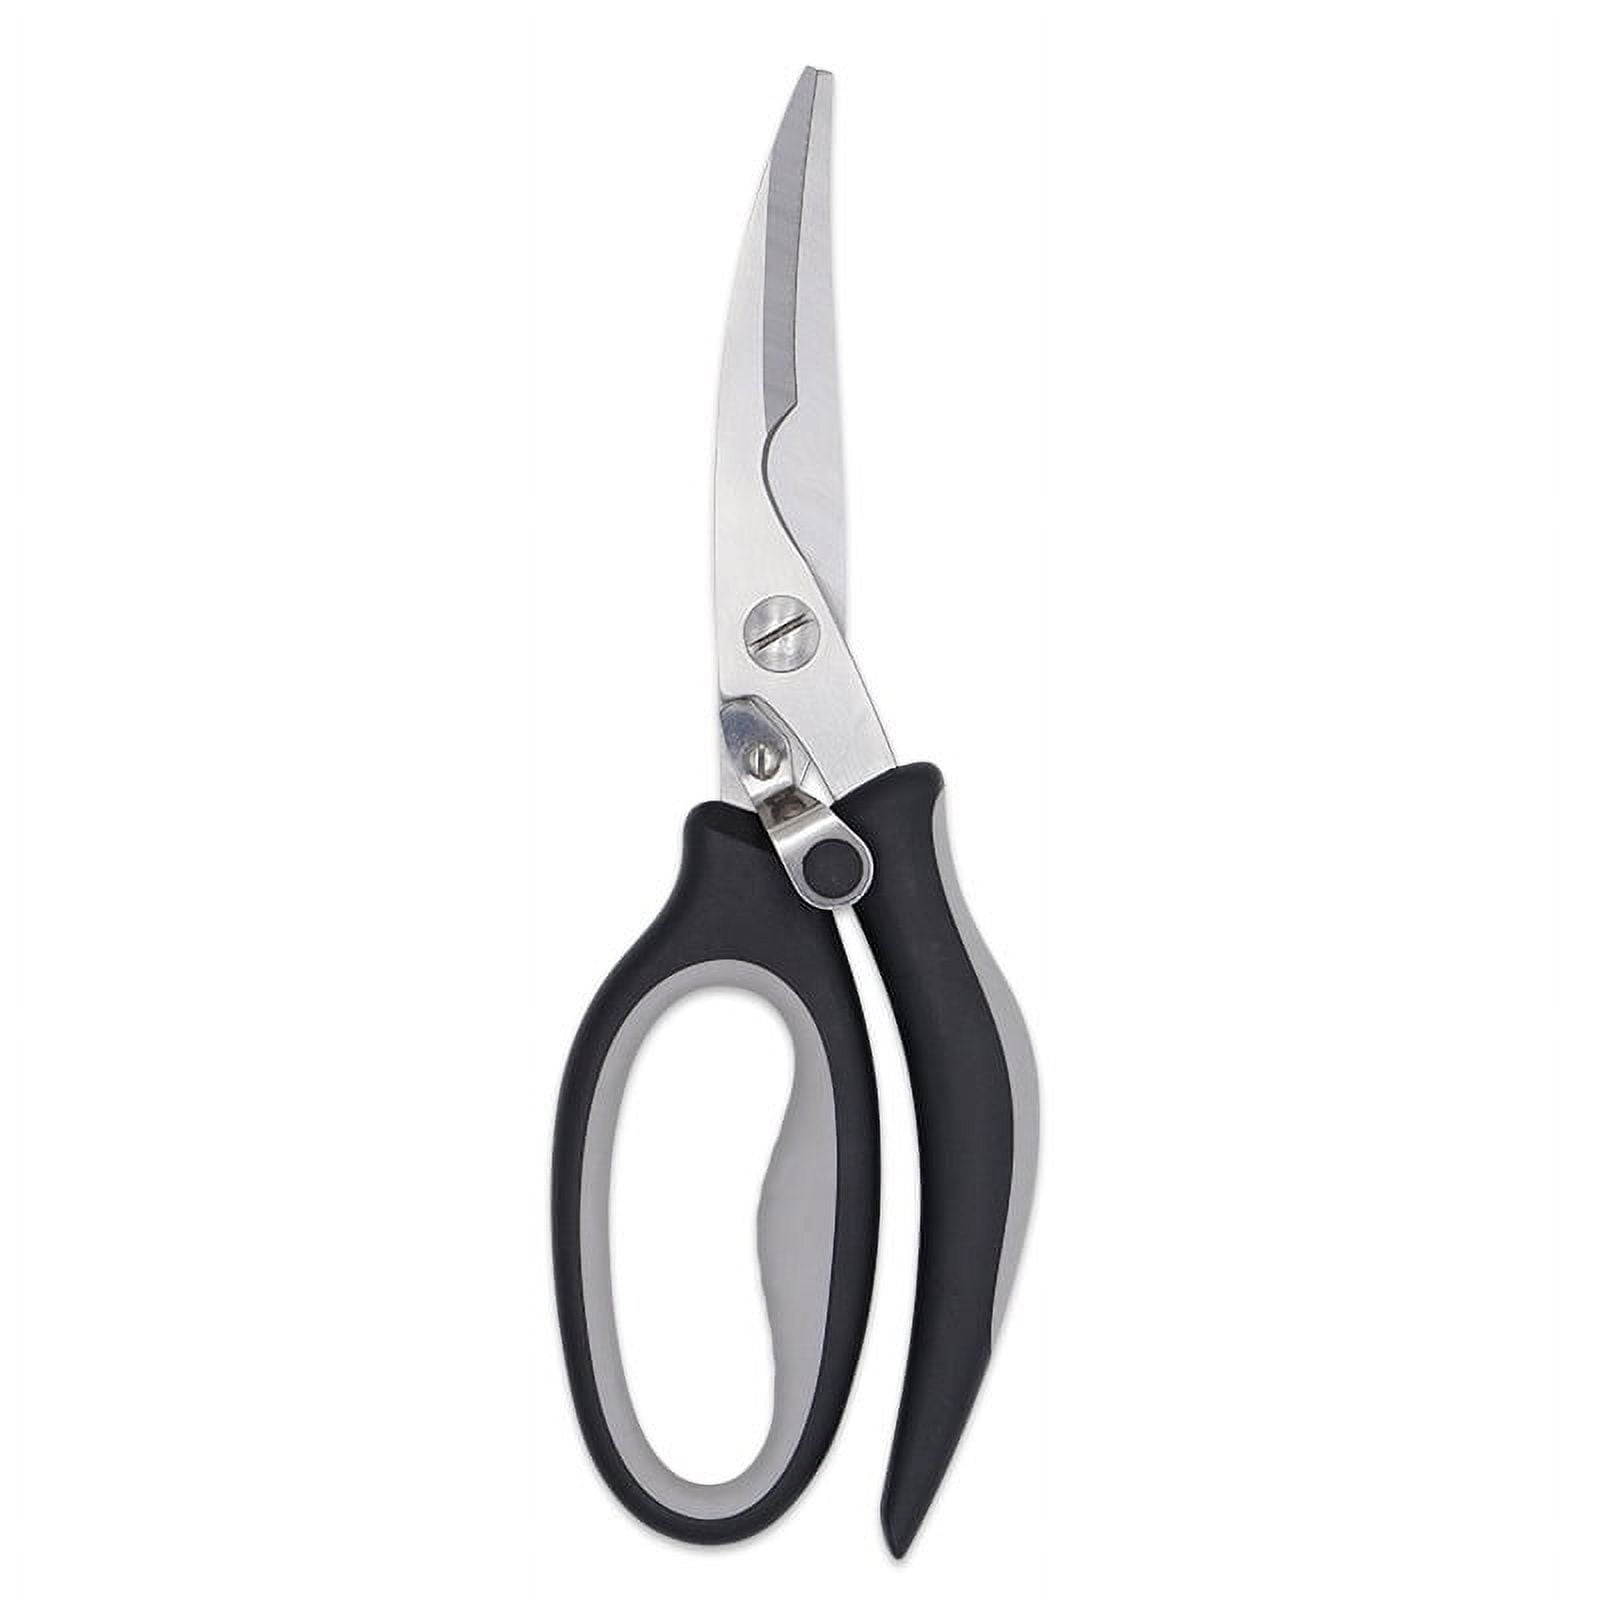 Tansung Poultry Shears Heavy Duty Kitchen Shears With Anti Slip Handle  Safety Lock Poultry Scissors For Meat Chicken Bone Poultry Spring Loaded  Dishwasher Safe Black, Shop The Latest Trends